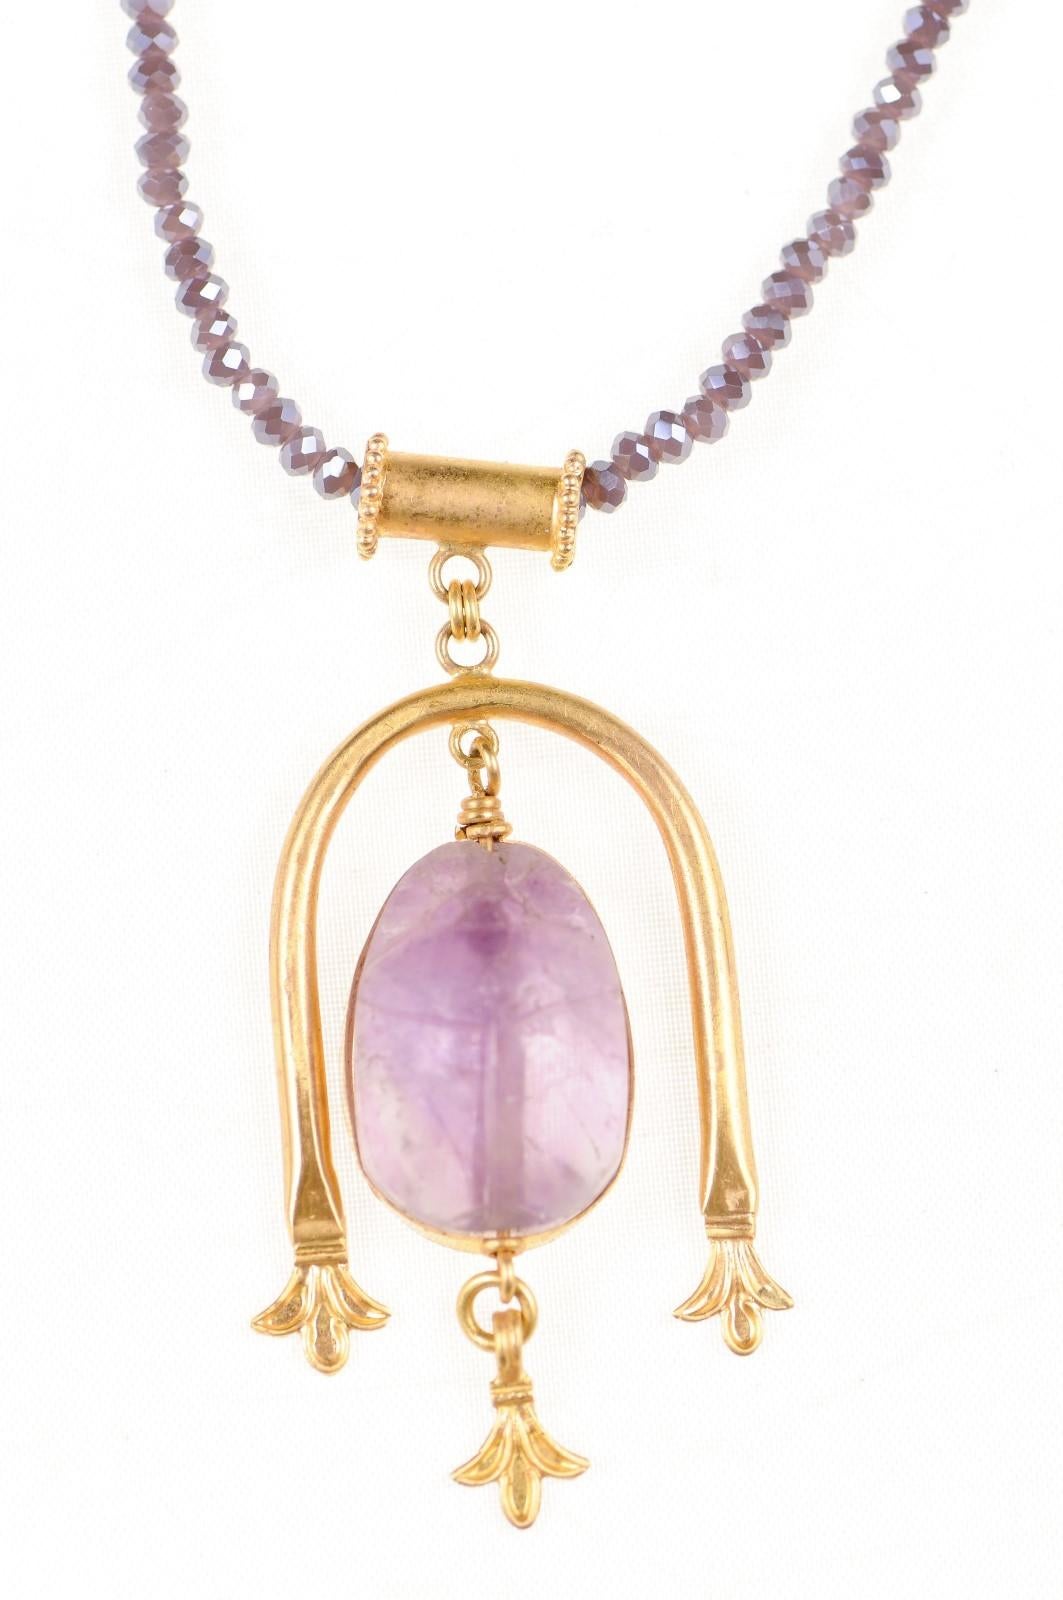 Roman Egypt lavender colored scarab (circa 100 BC to 100 AD) set into a custom 21K gold decorative u-drop pendant and bail. This gorgeous purple amethyst scarab, once likely adorned a ring or other piece of jewelry in centuries past. Overall pendant